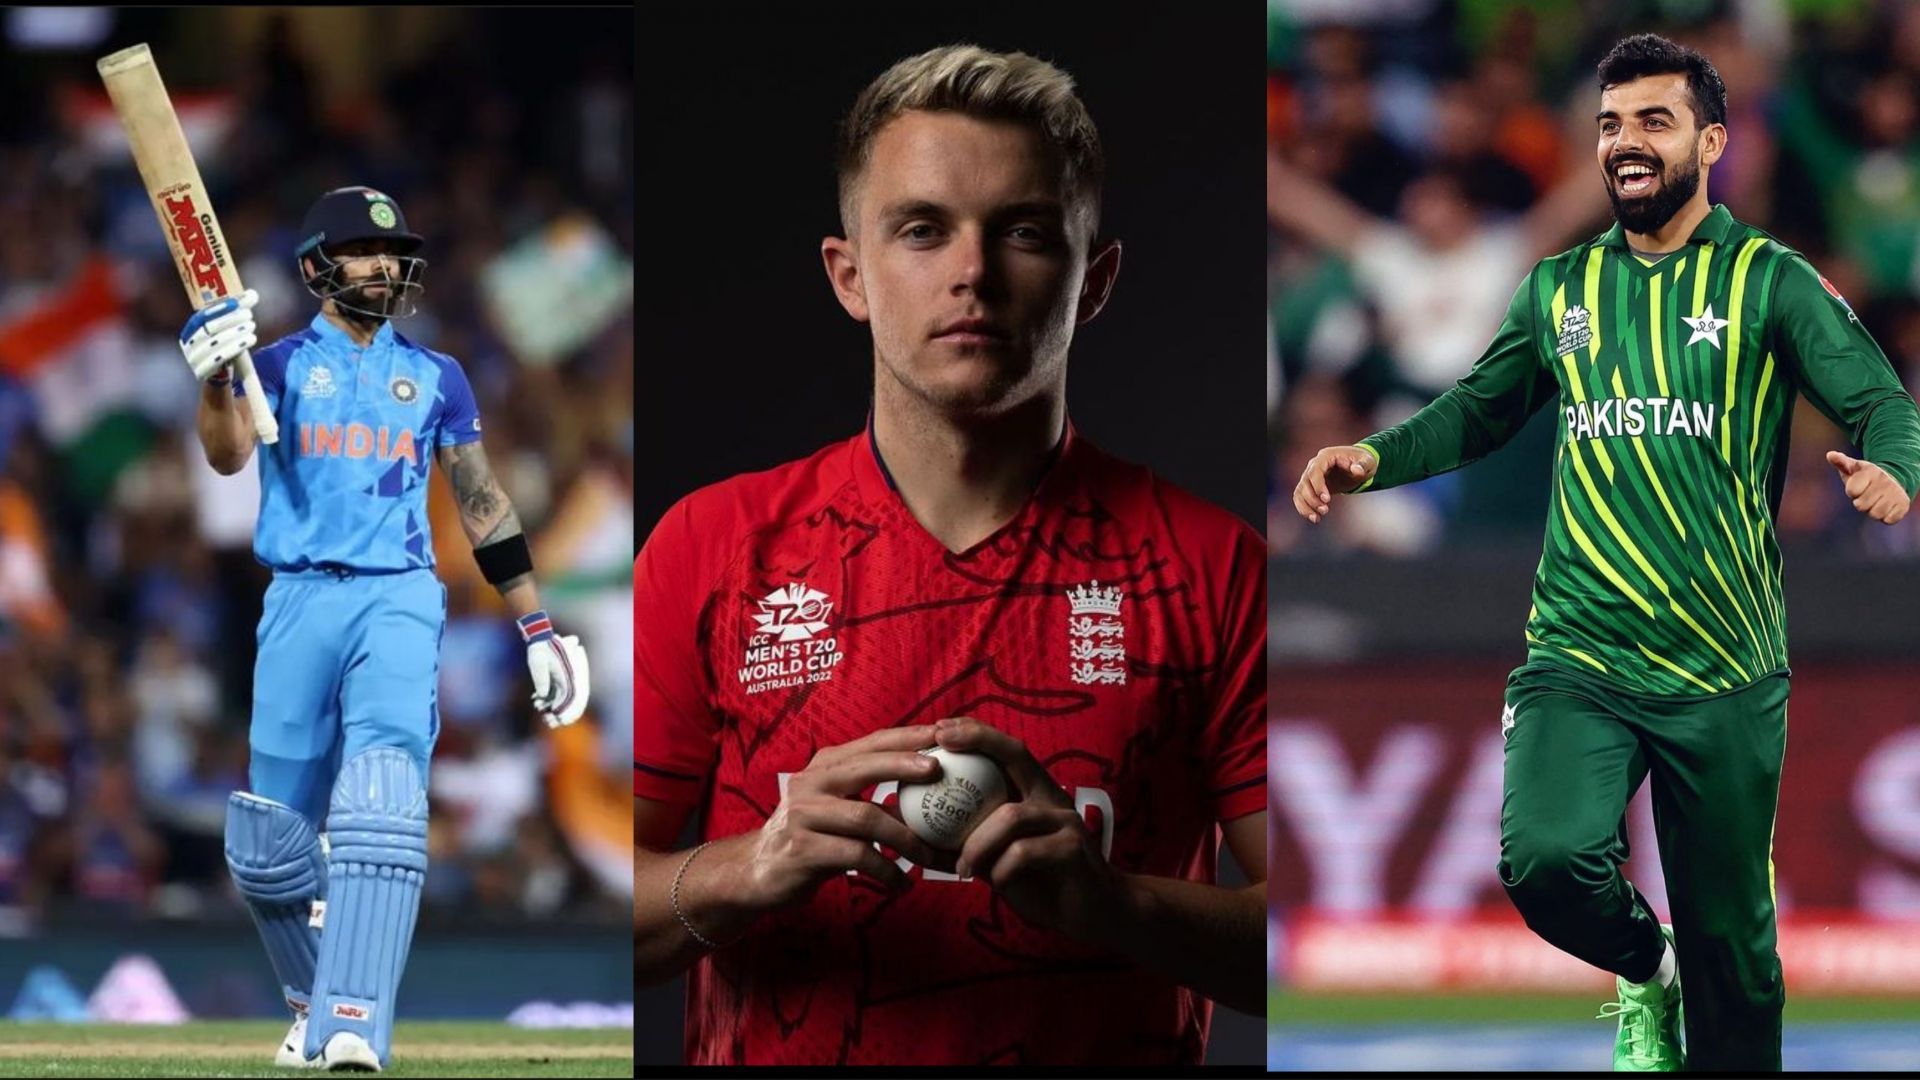 Virat Kohli, Sam Curran and Shadab Khan feature in this playing XI (Image: Instagram)